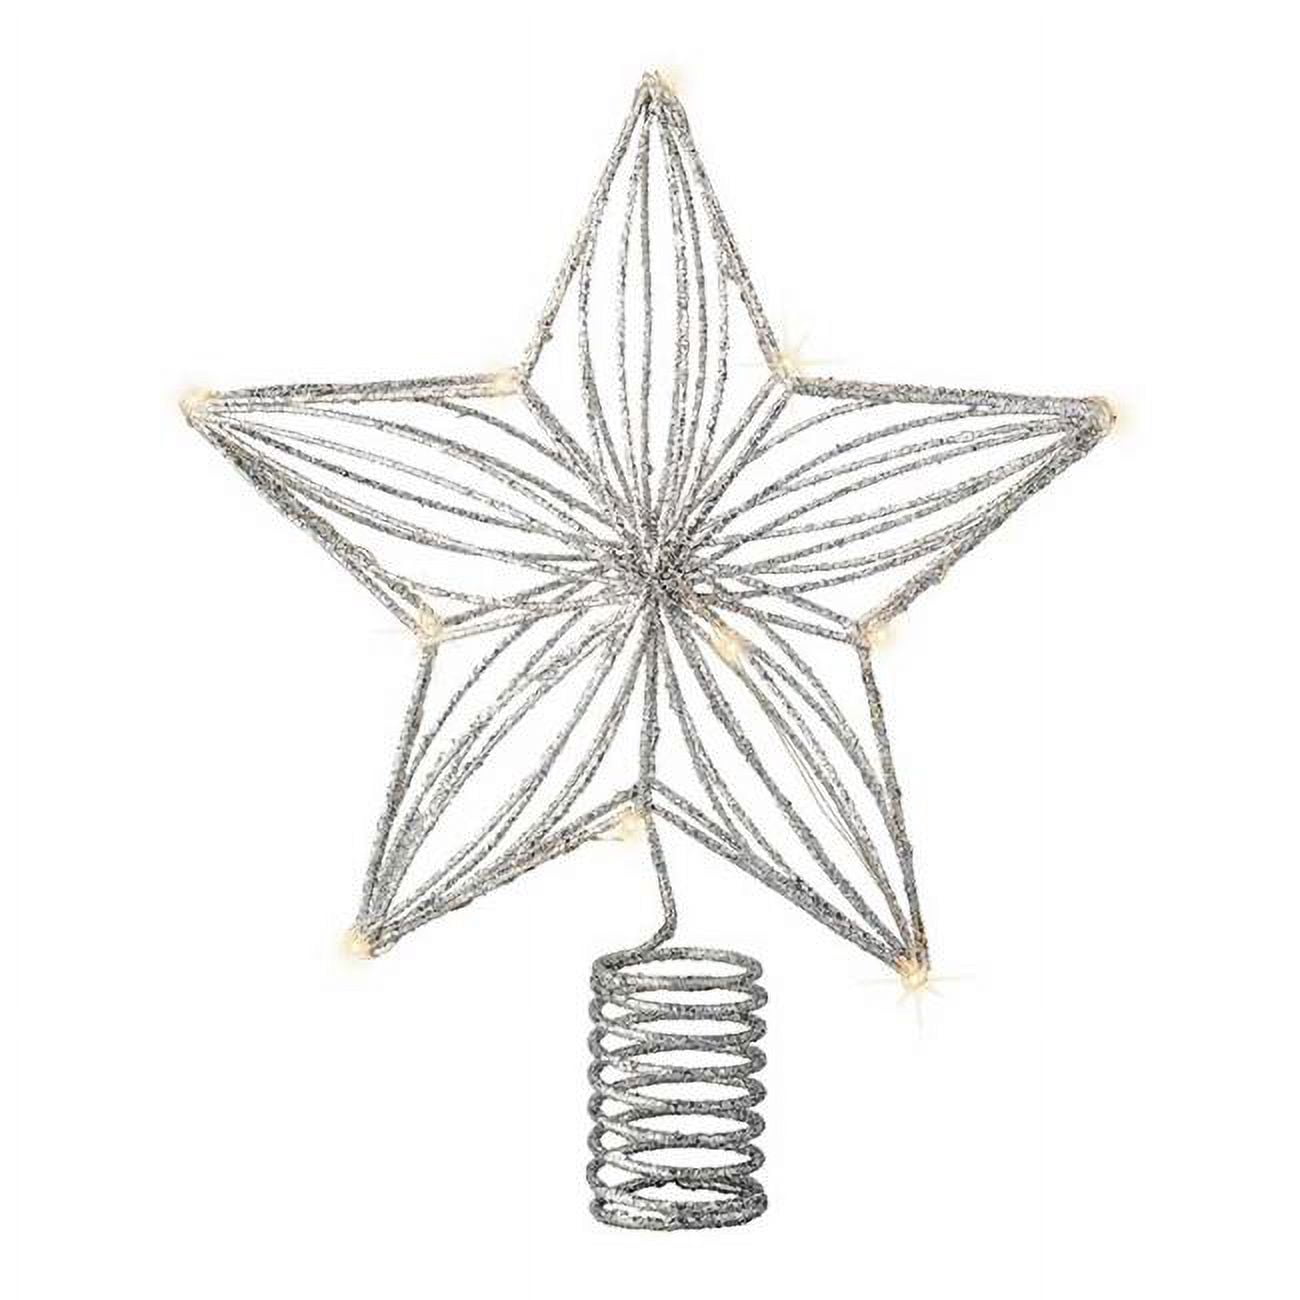 Picture of Kaemingk International 9086481 Silver Metal Star Battery Operated Warm White Micro LED Tree Topper